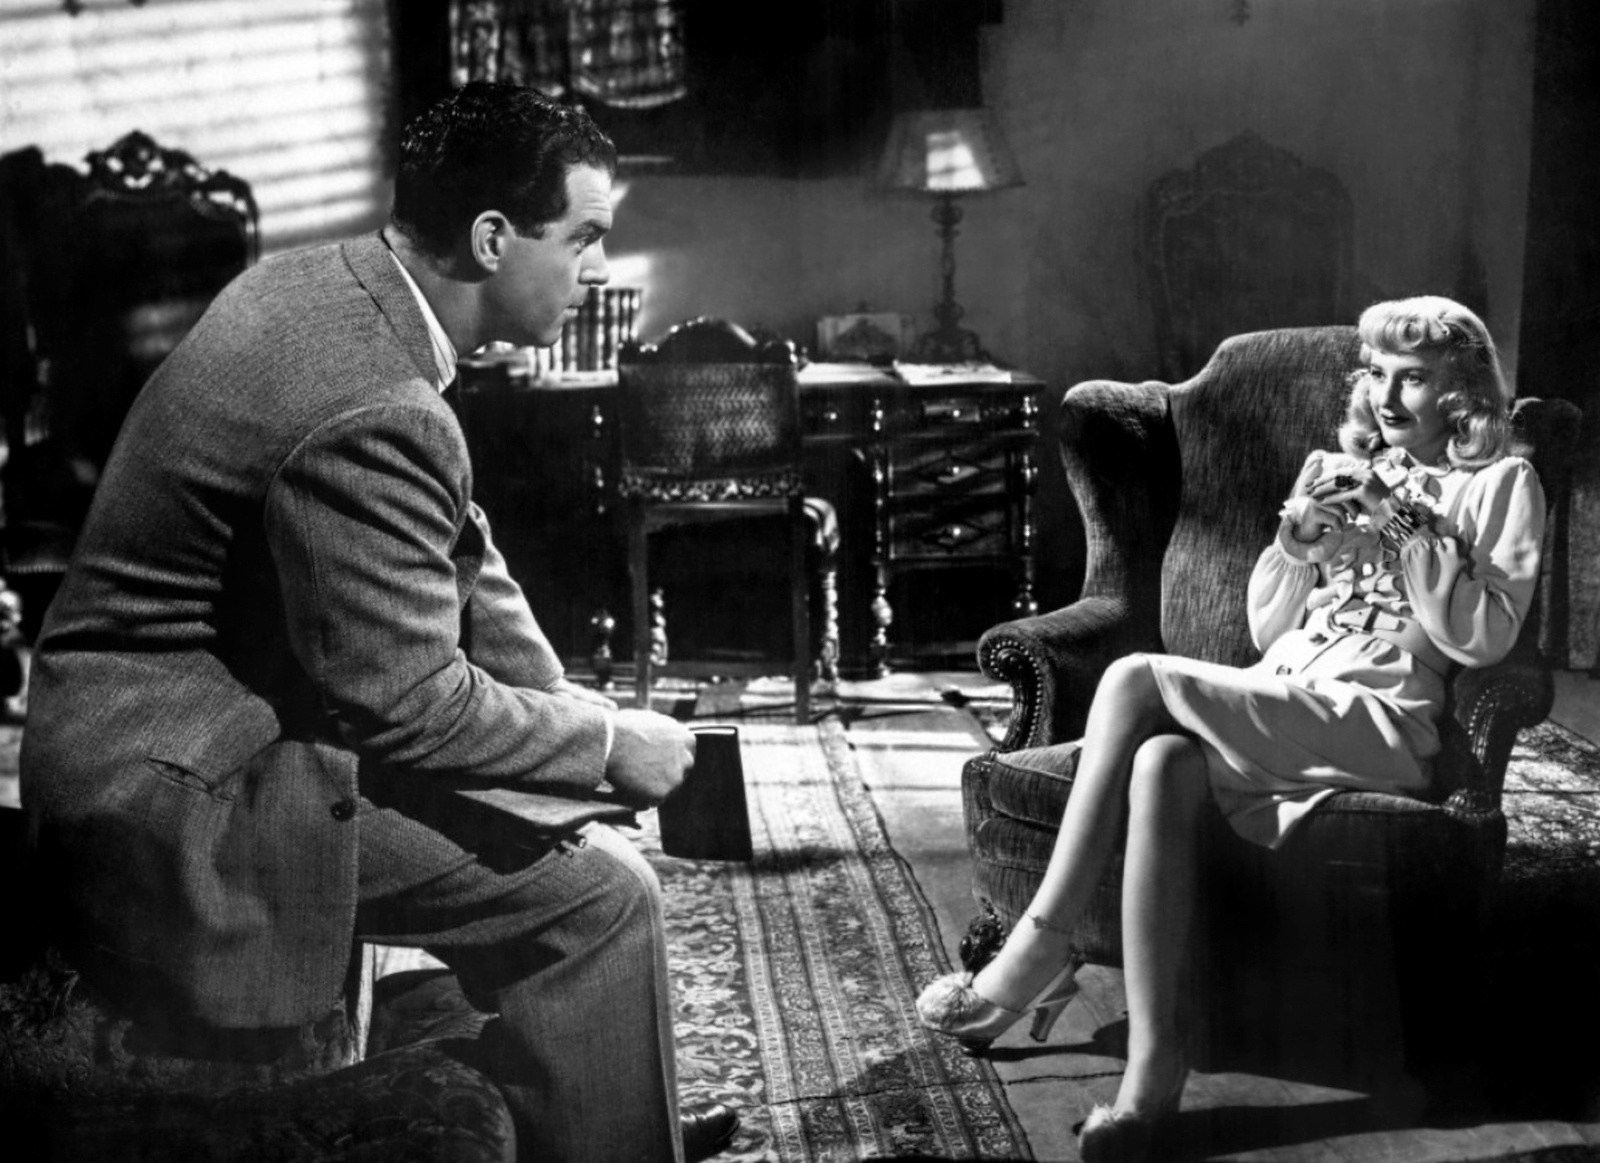 Çifte Tazminat / Double Indemnity (1944)